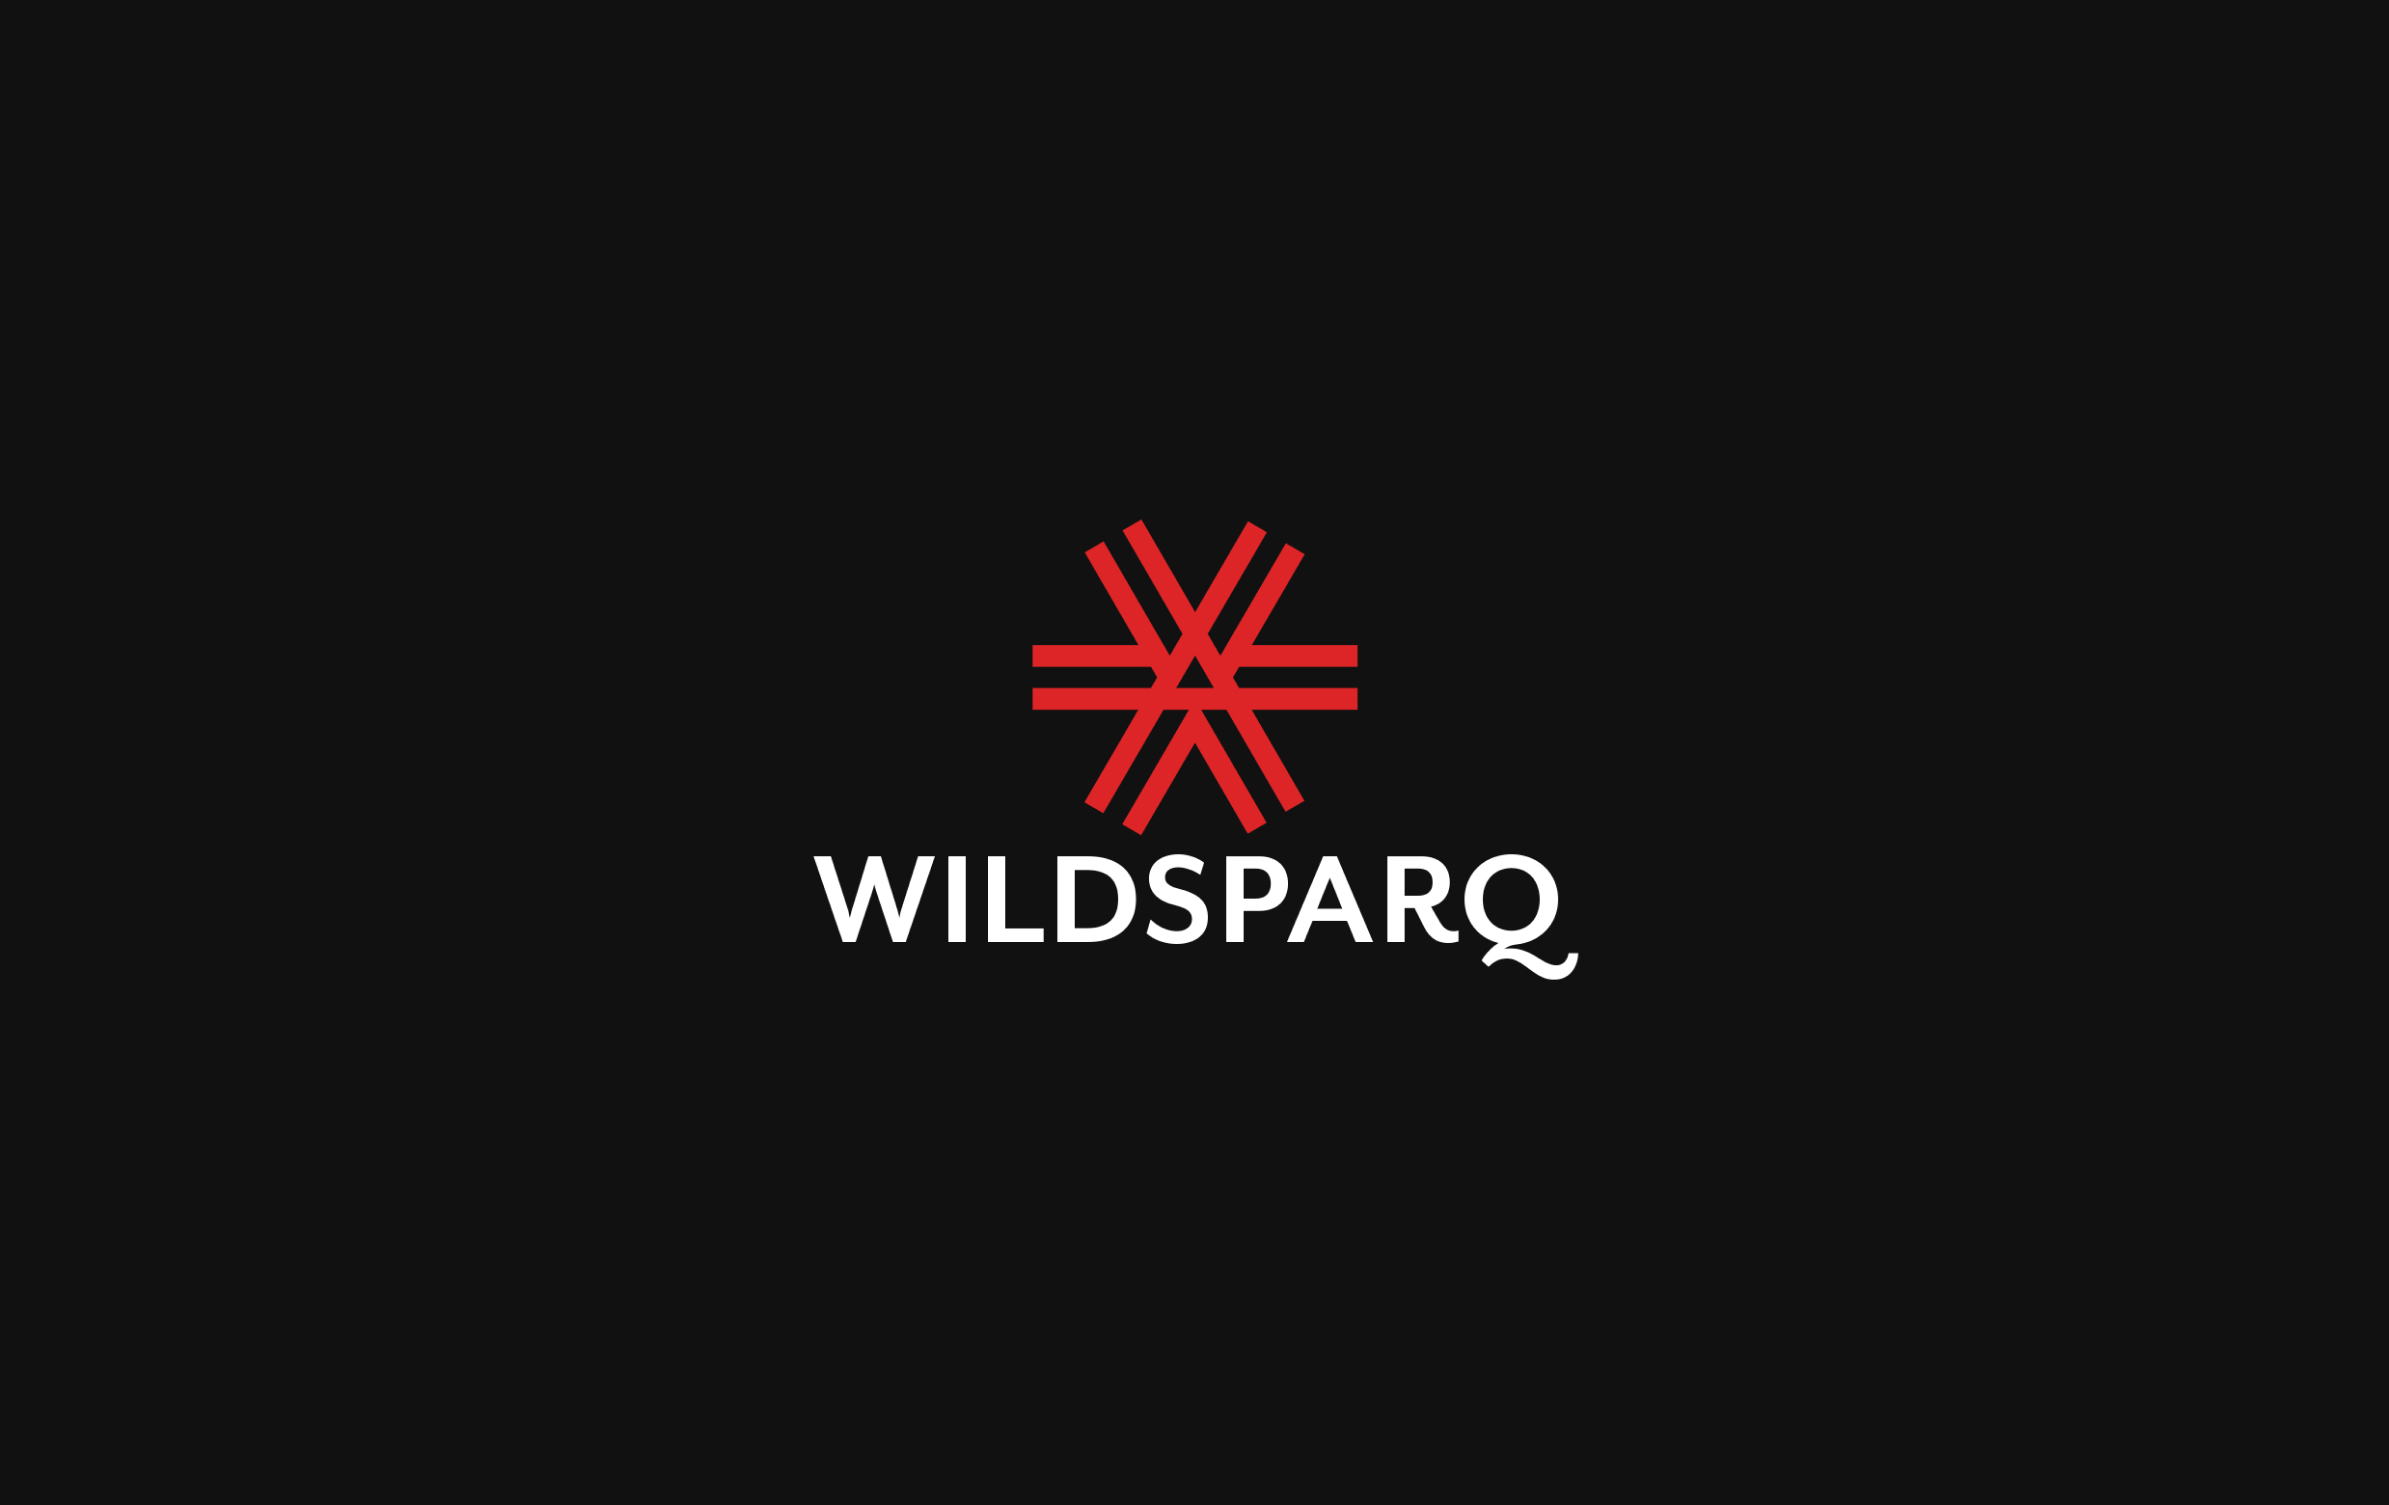 Wildsparq cover image